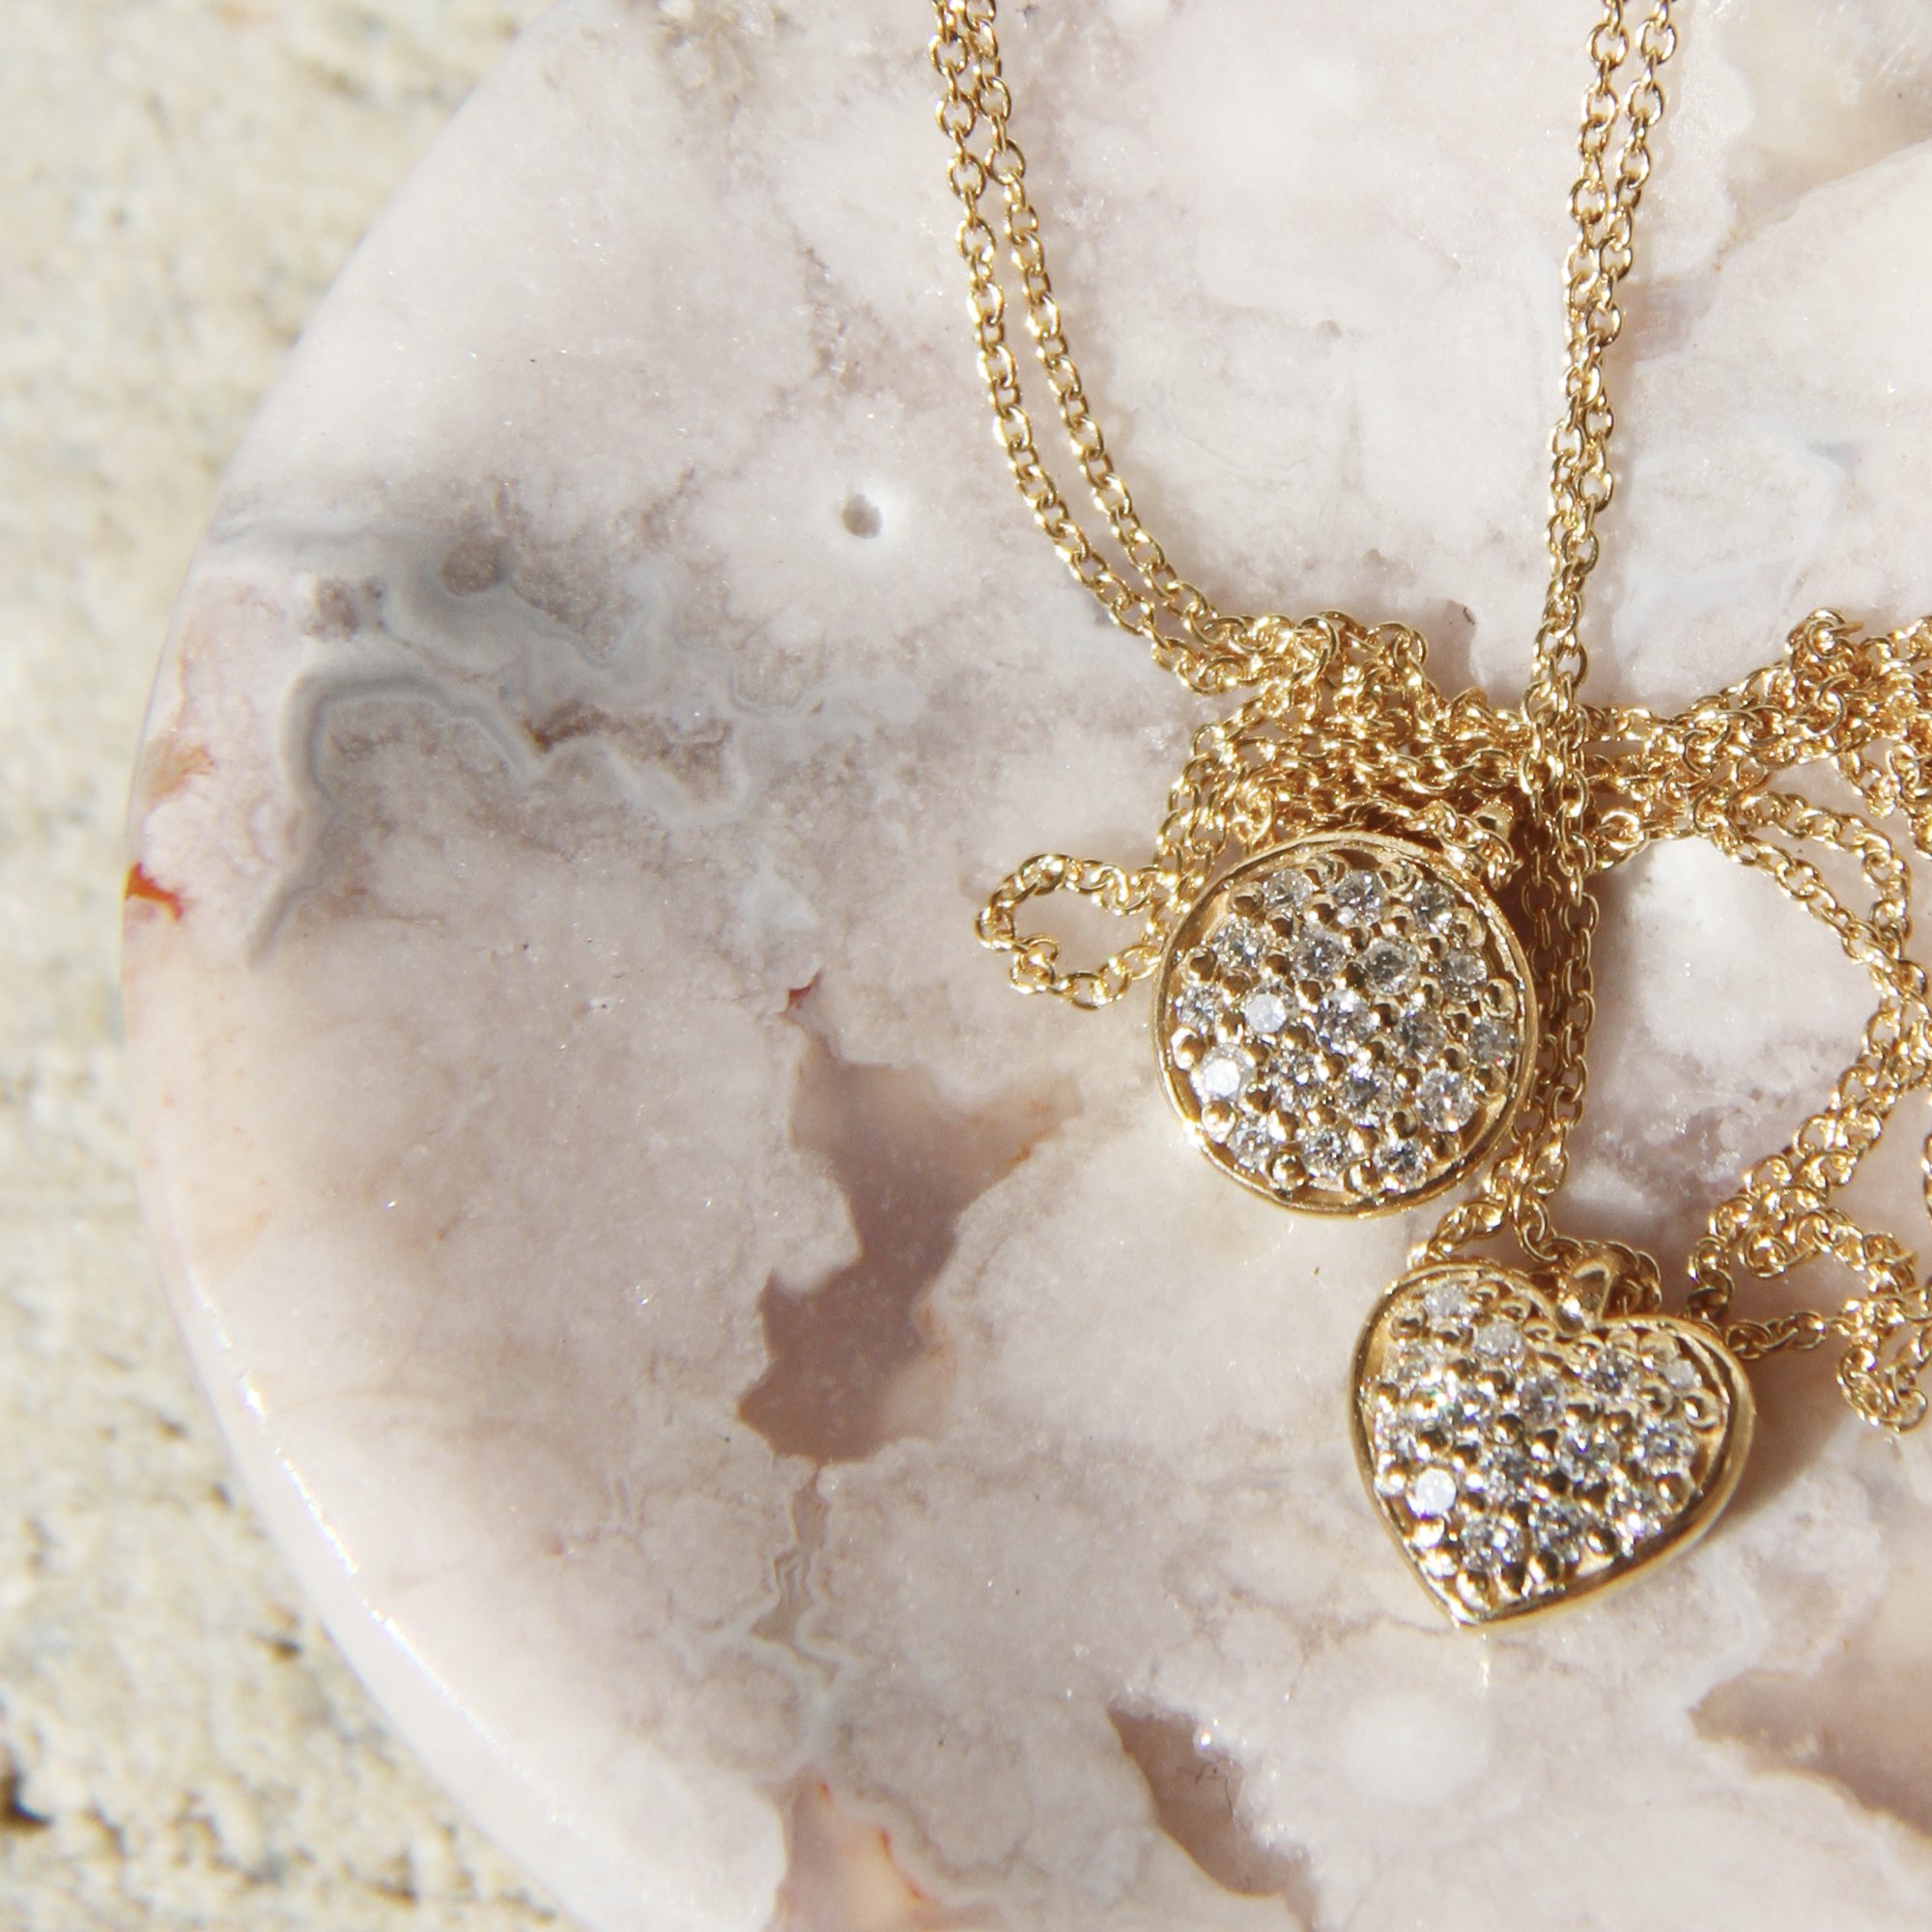 Pave Set Diamond Necklaces in 14ct Gold